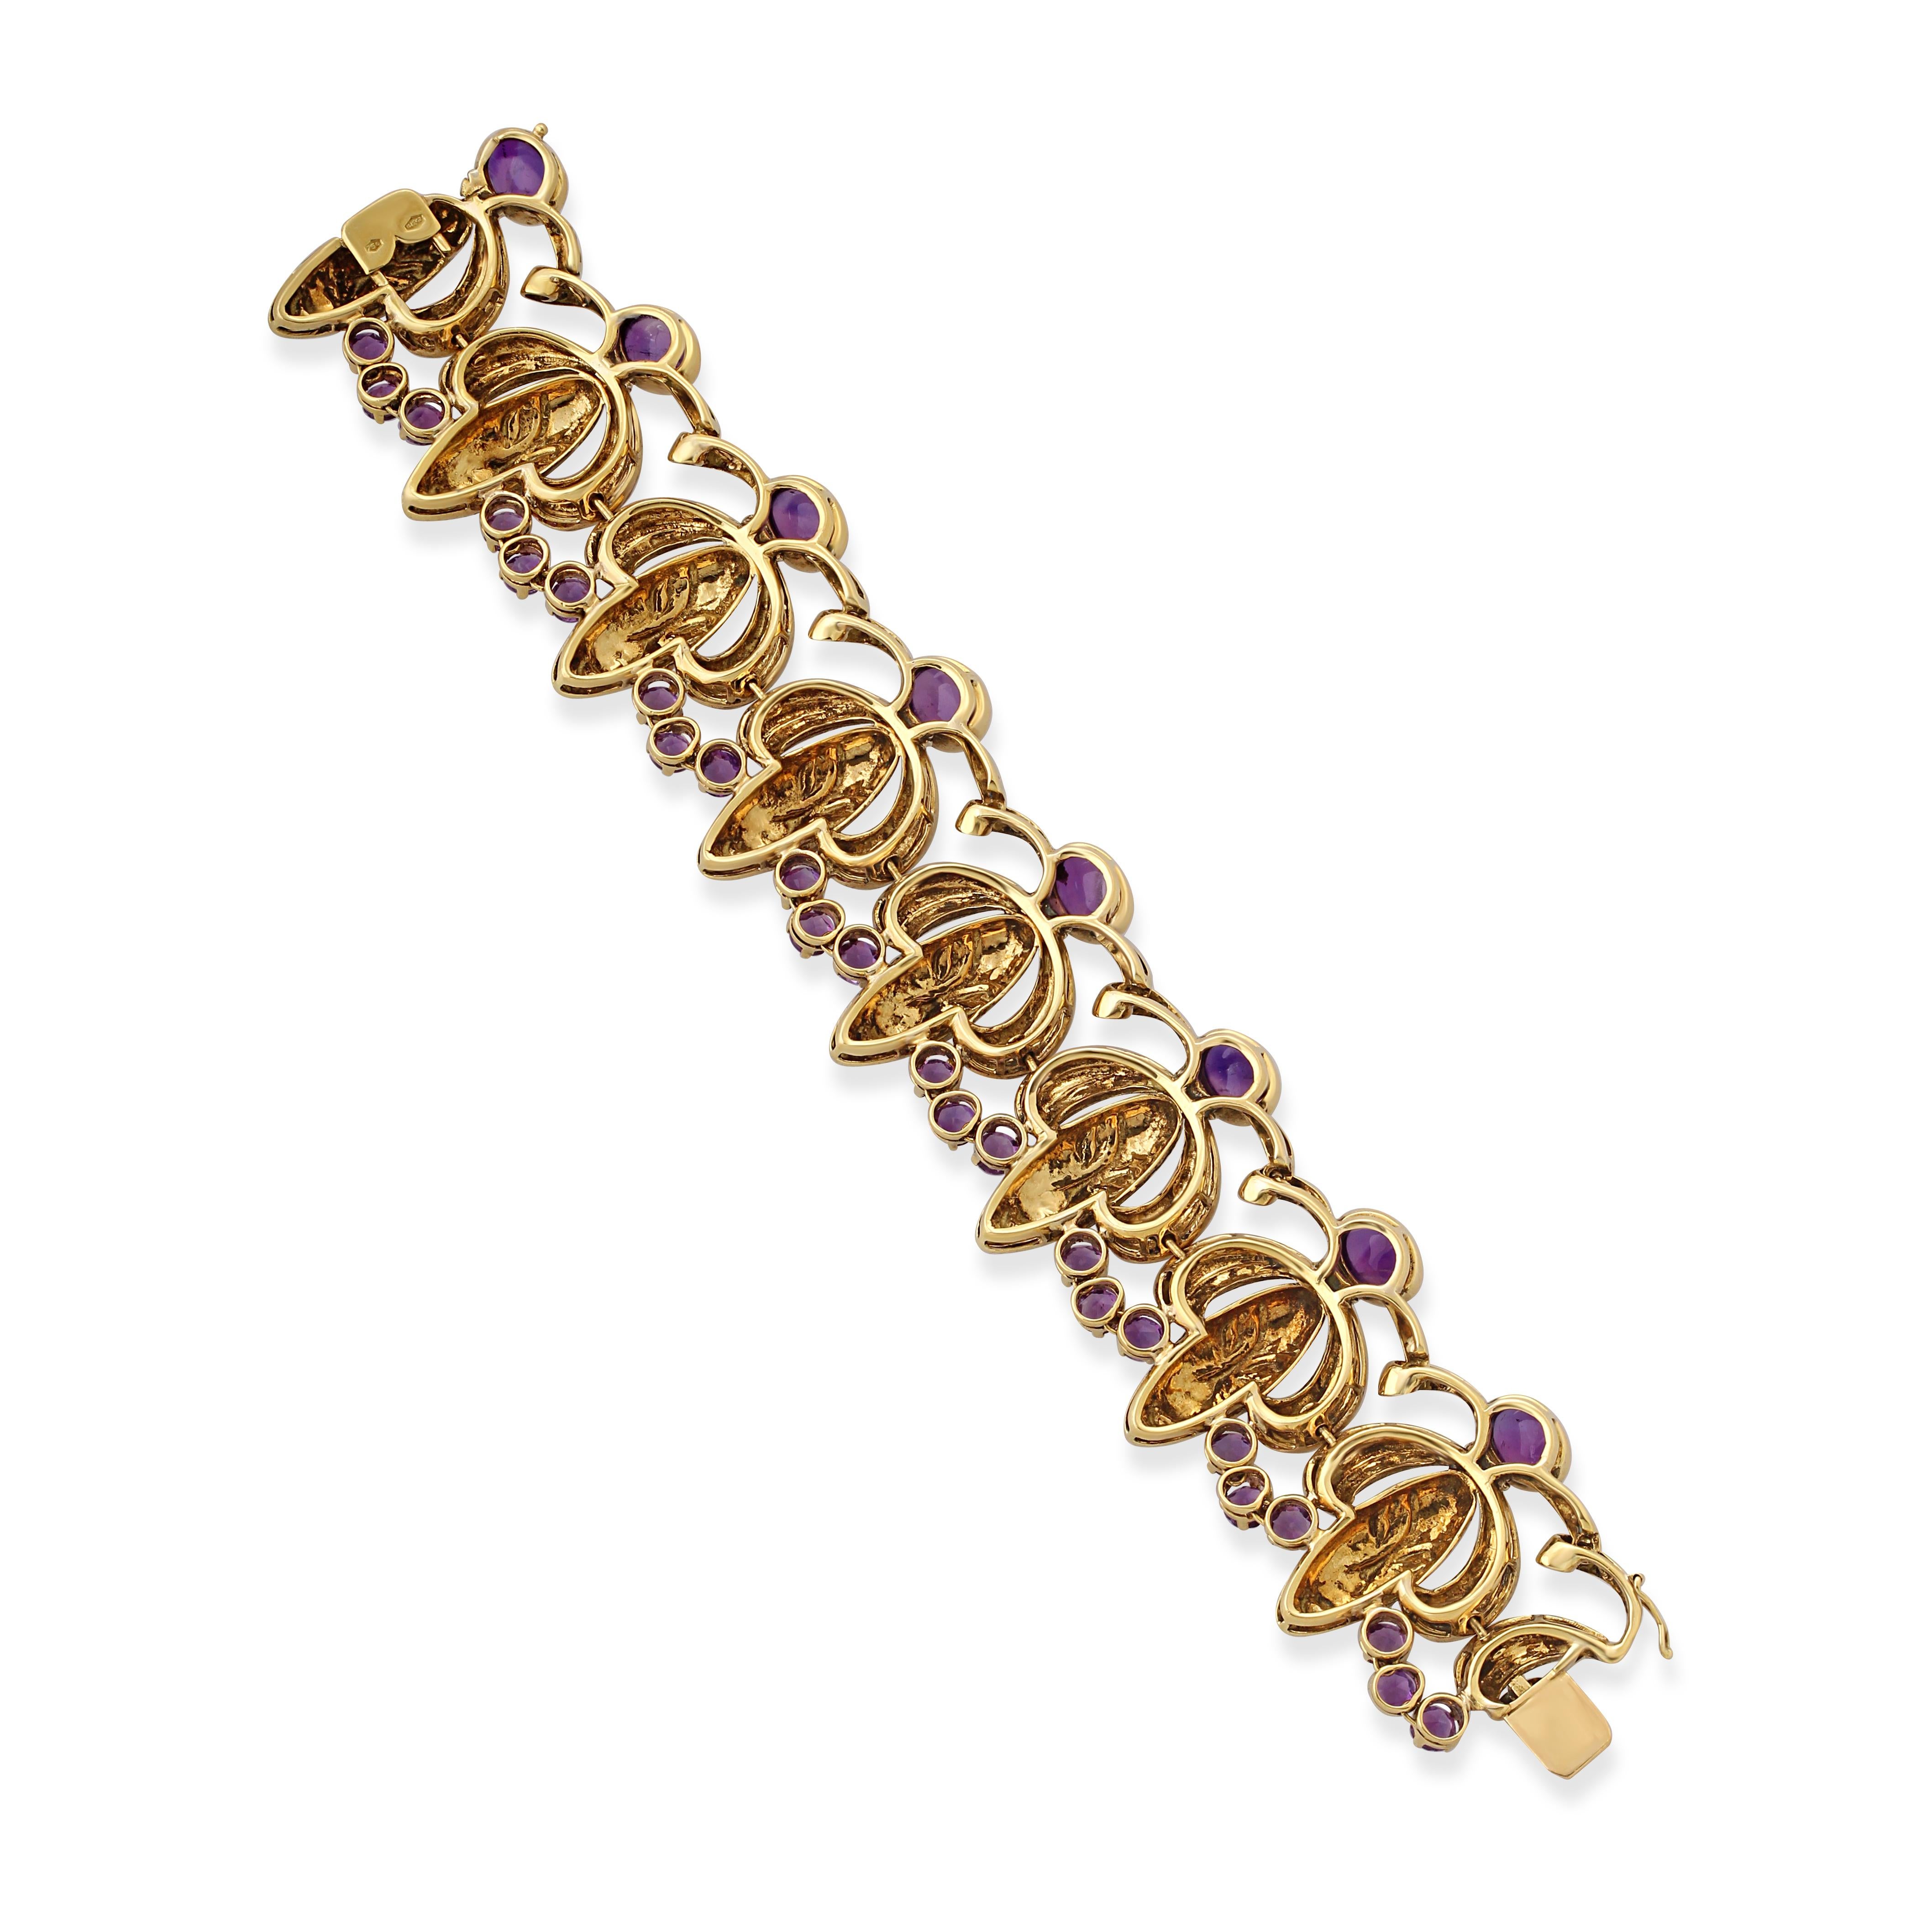 A uniquely designed gold and amethyst bracelet. Crafted in 18k hammered textured gold stylised as a repeating motif of smiling faces topped with cabochon amethysts and linked with three circle-cut amethysts. Circa 1960s. Approximately 15 carats